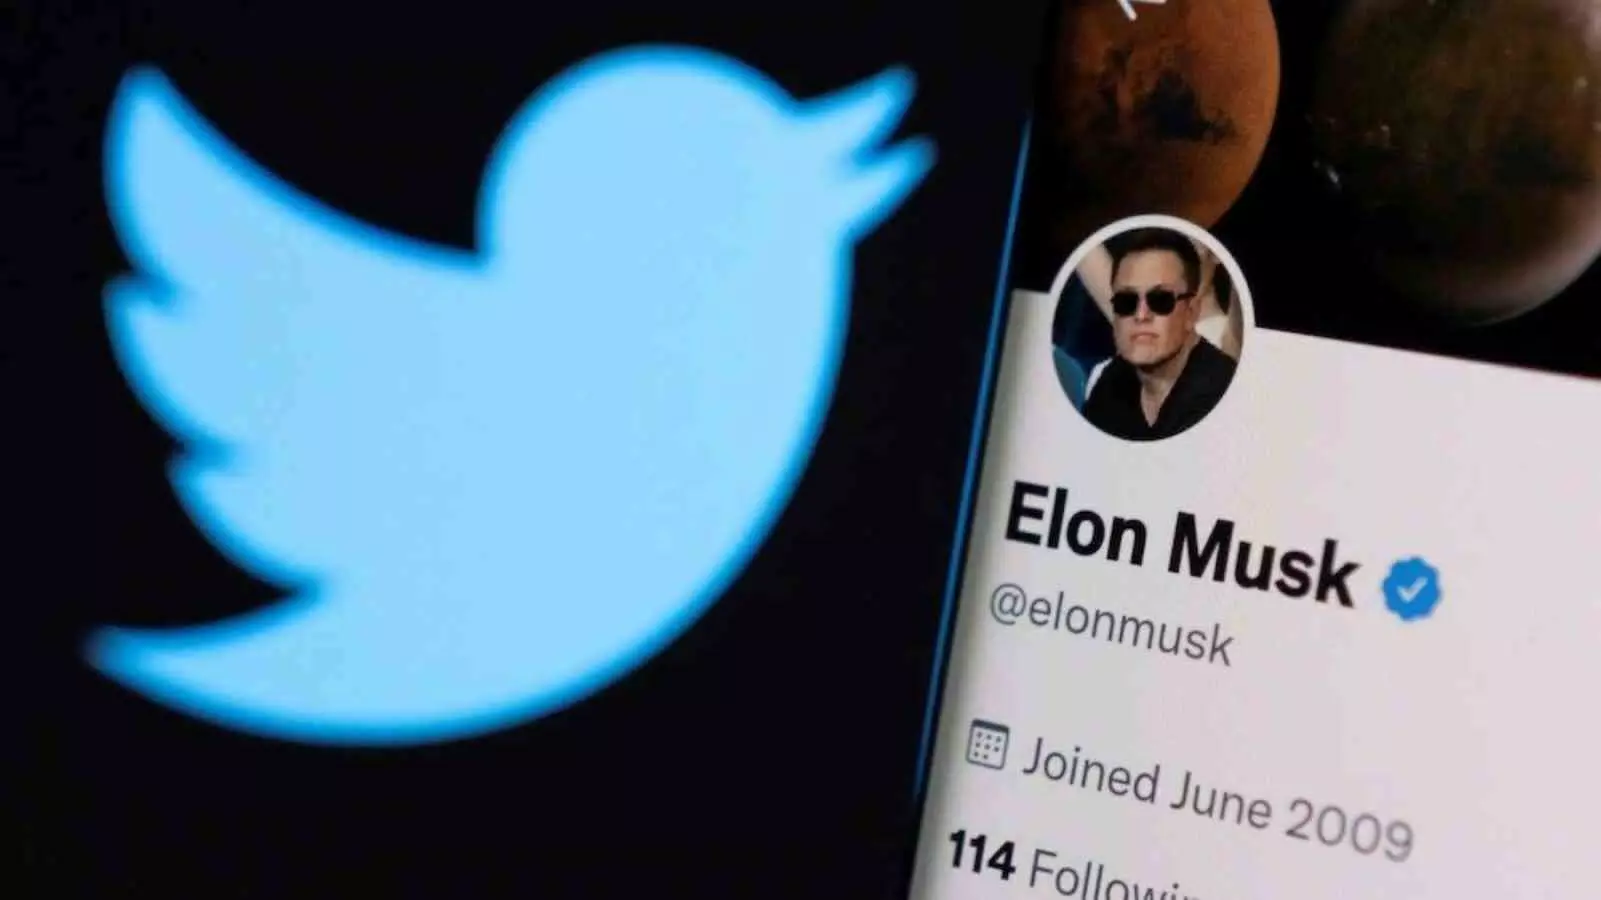 twitter verification process twitter blue verified users to soon pay for blue tick elon musk plans